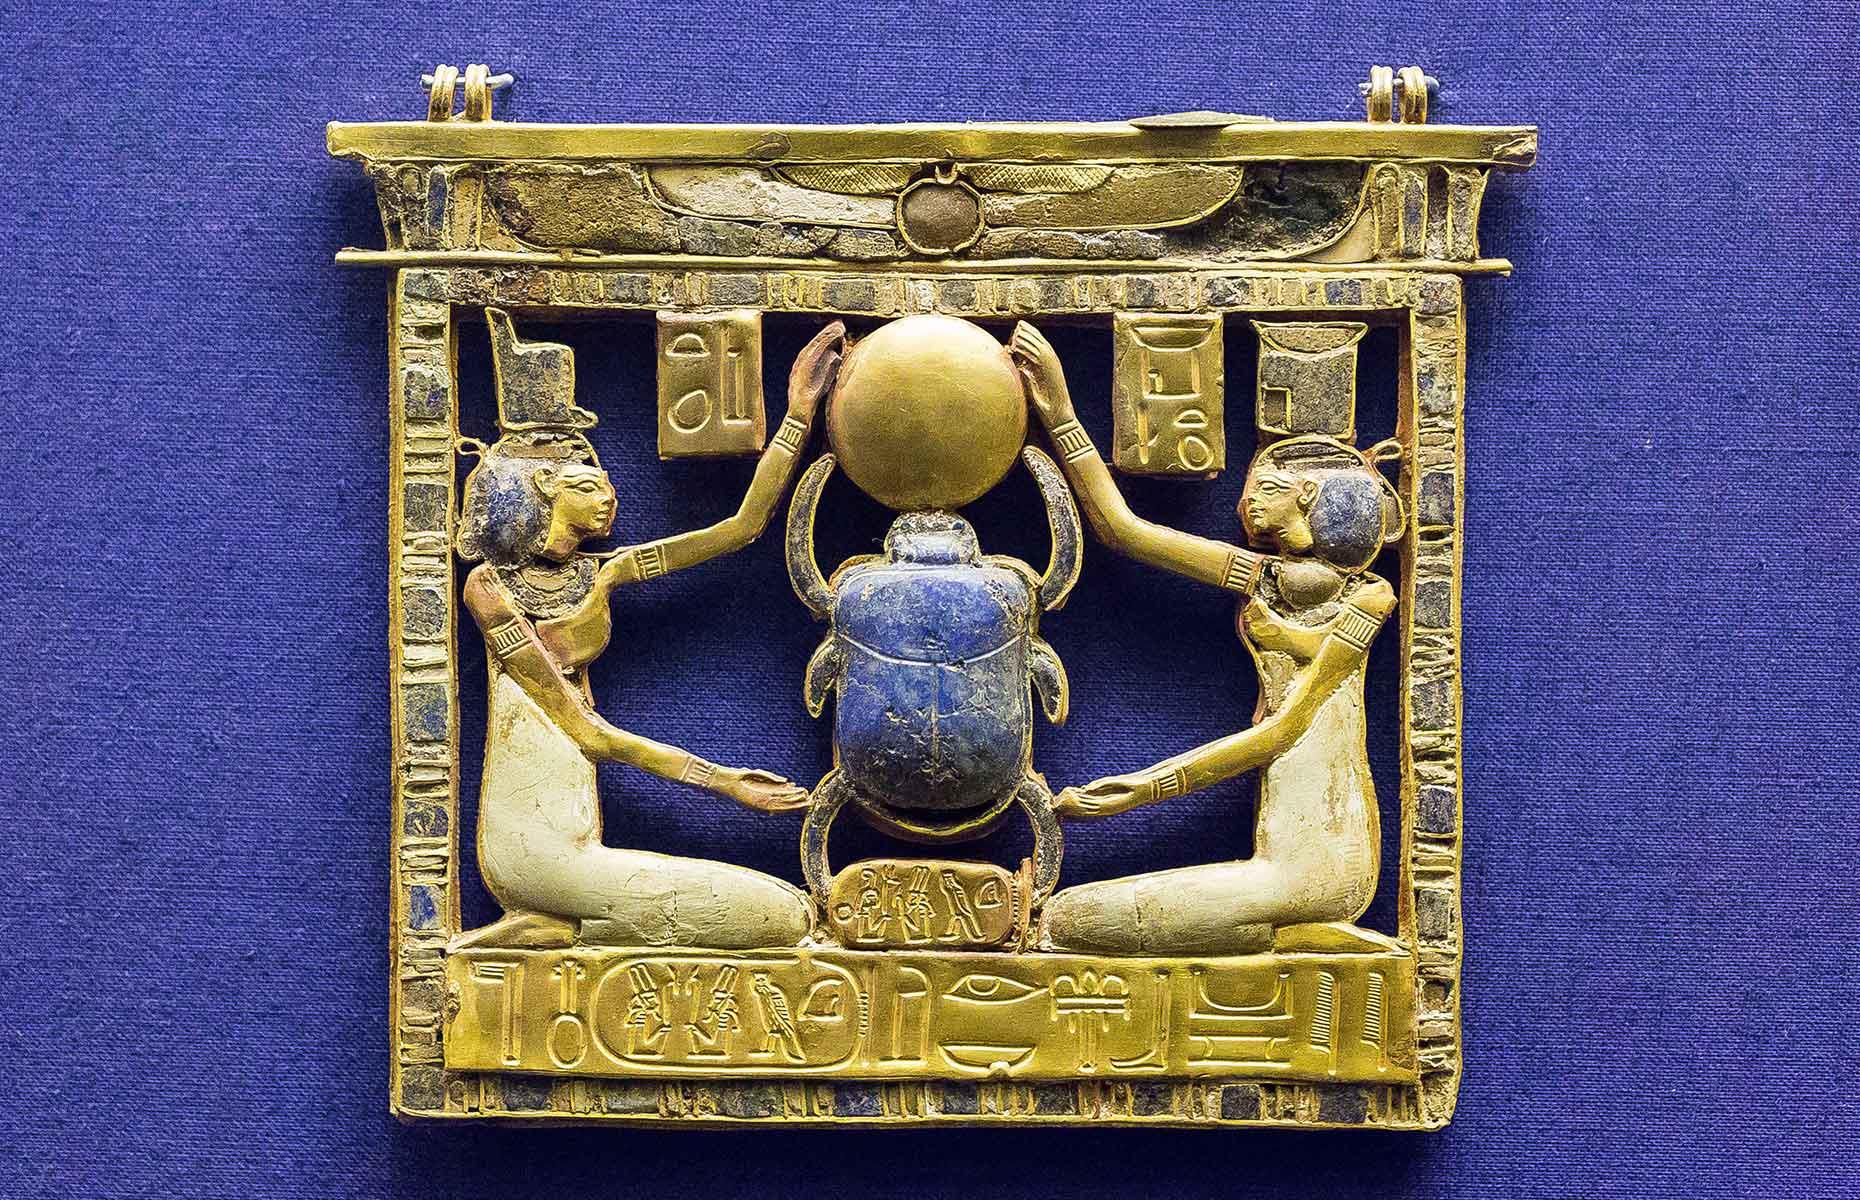 <p>Discovered inside the tomb of king Amenemope (a 21st Dynasty pharaoh) was this detailed pectoral brooch. At the centre <a href="https://egypt-museum.com/pectoral-of-king-amenemope/">is a lapis lazuli scarab</a> touching the golden sun disc, representing rebirth. The scarab is flanked by the goddesses Isis and Nephthys, who protected the wearer, while along the bottom runs a cartouche, an inscription of the king's name. </p>  <p><a href="https://www.loveexploring.com/gallerylist/70876/littleknown-incredible-roman-ruins-around-the-world"><strong>Now discover these little-known Roman ruins from around the world</strong></a></p>